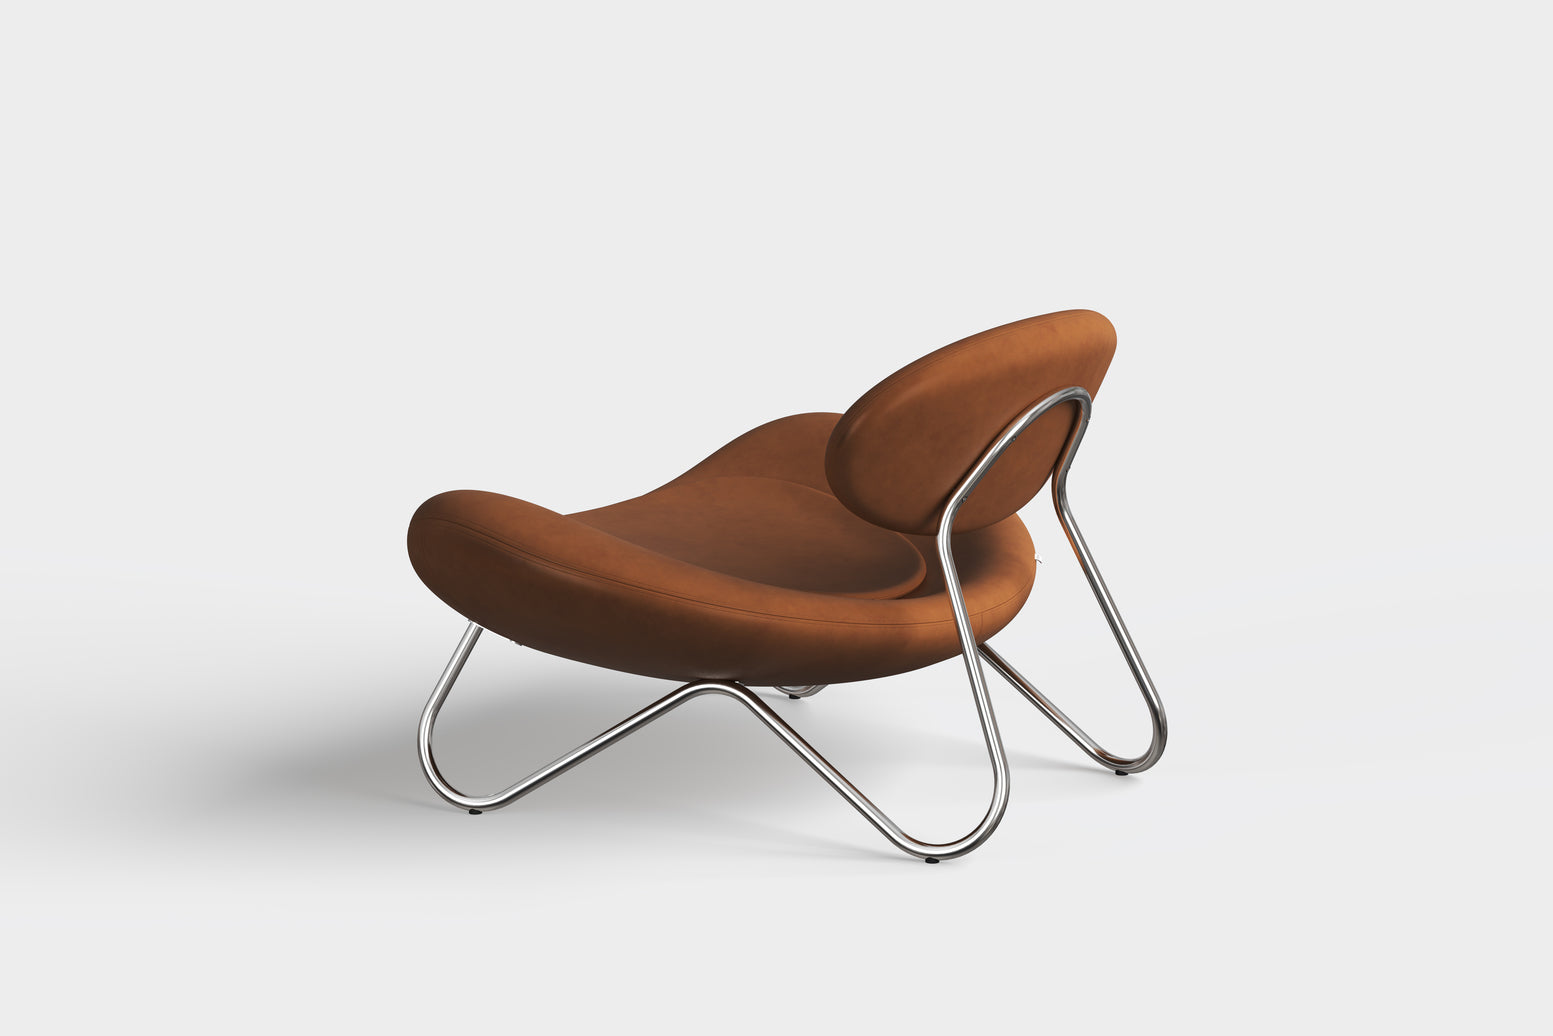 meadow lounge chair cognac leather & chrome by woud at adorn.house  Edit alt text